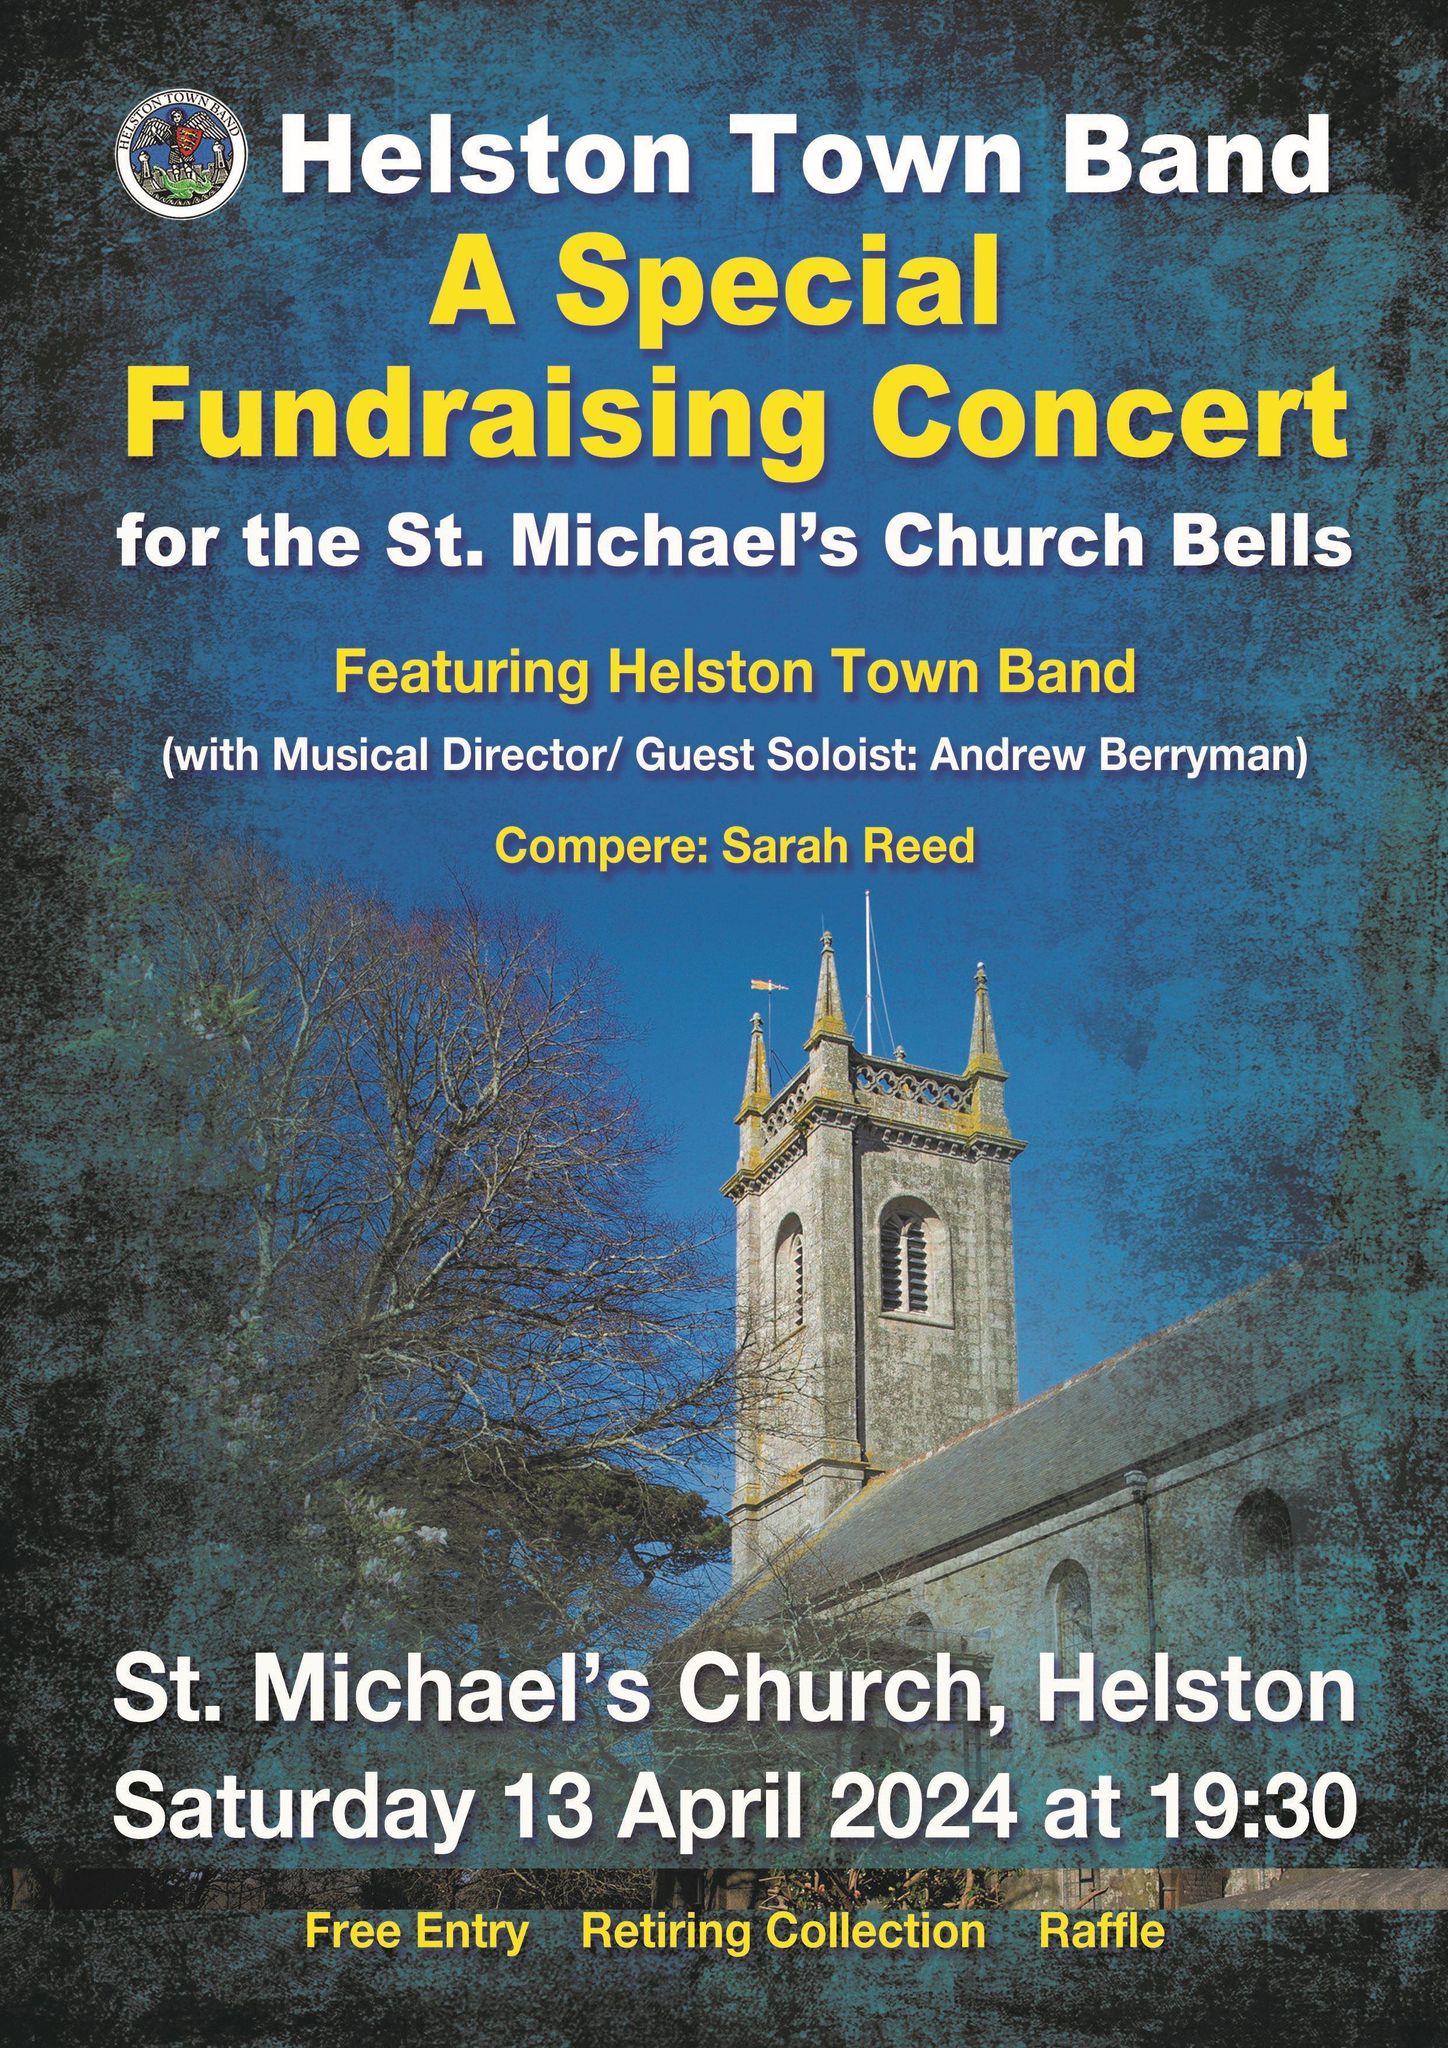 Concert in aid of St. Michael's Church Bells